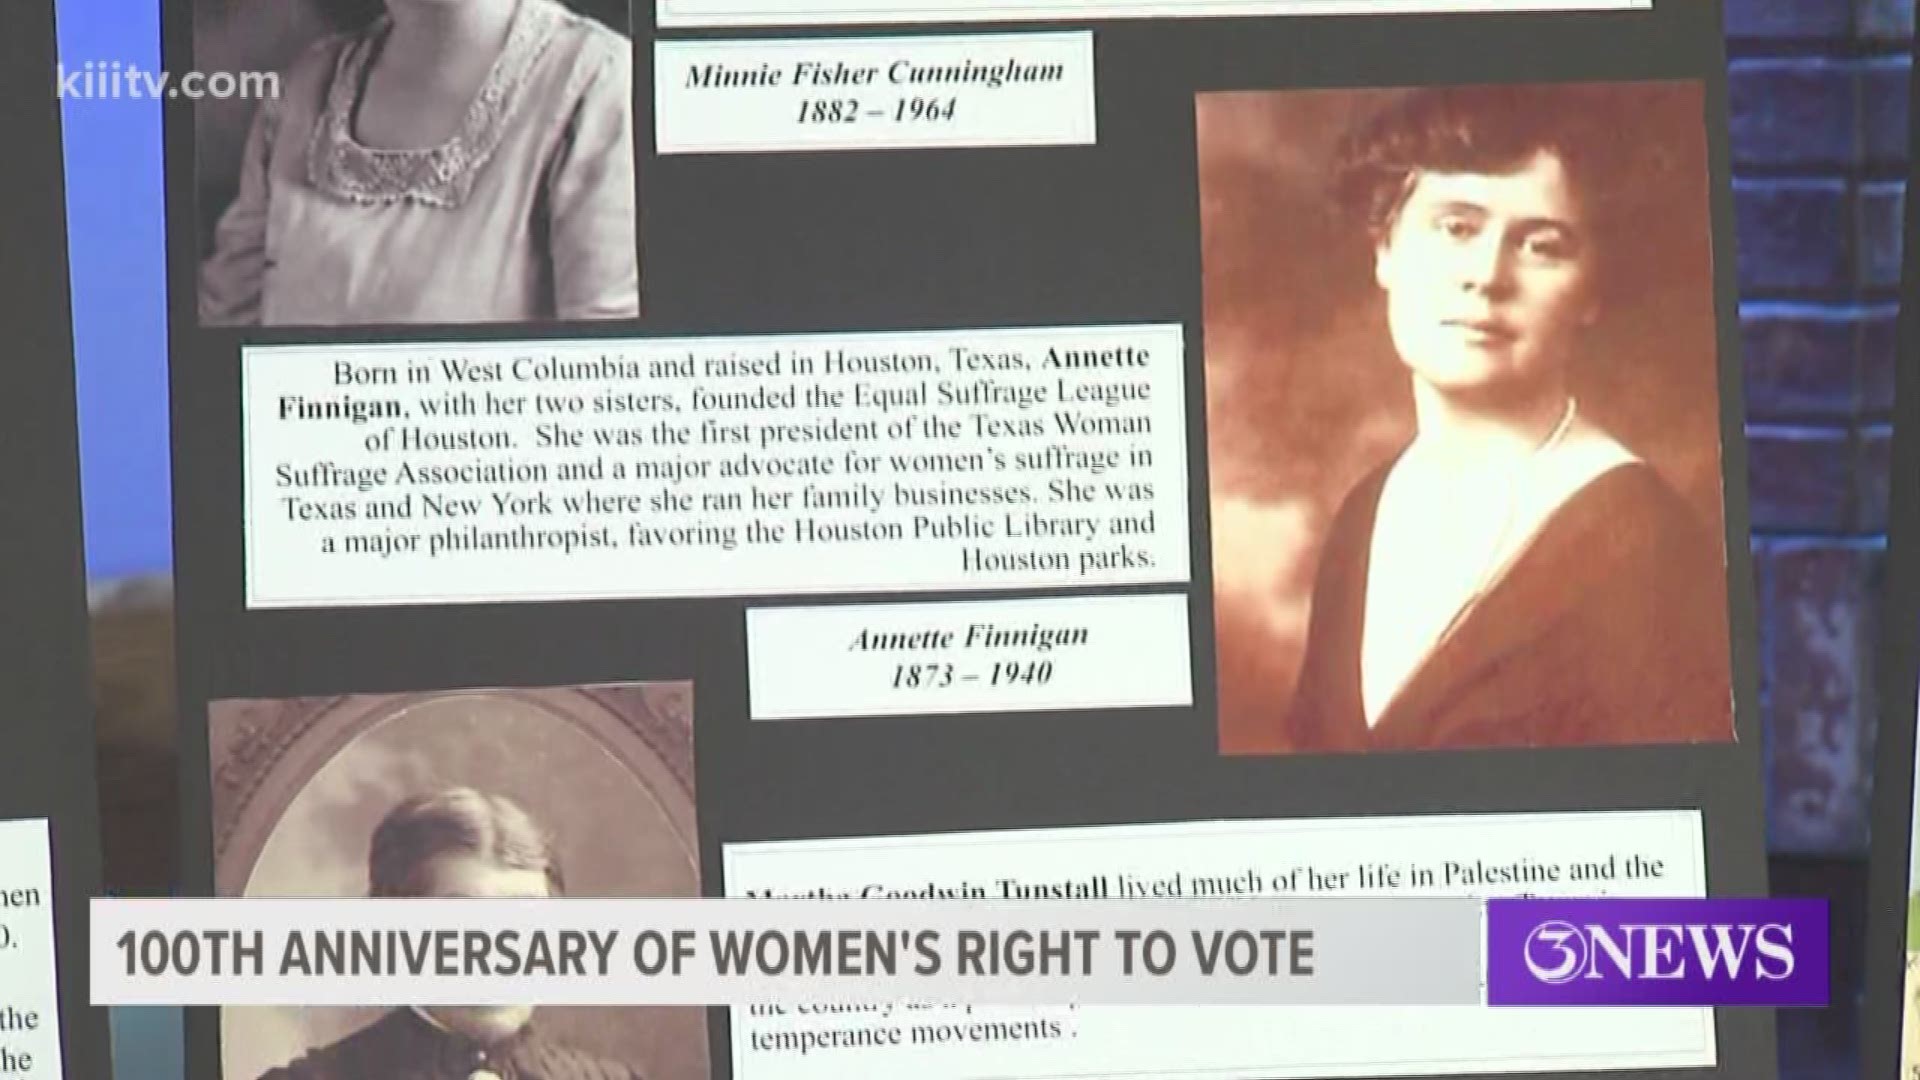 March is Women's History Month and this year people are celebrating the 100th anniversary of women's right to vote.